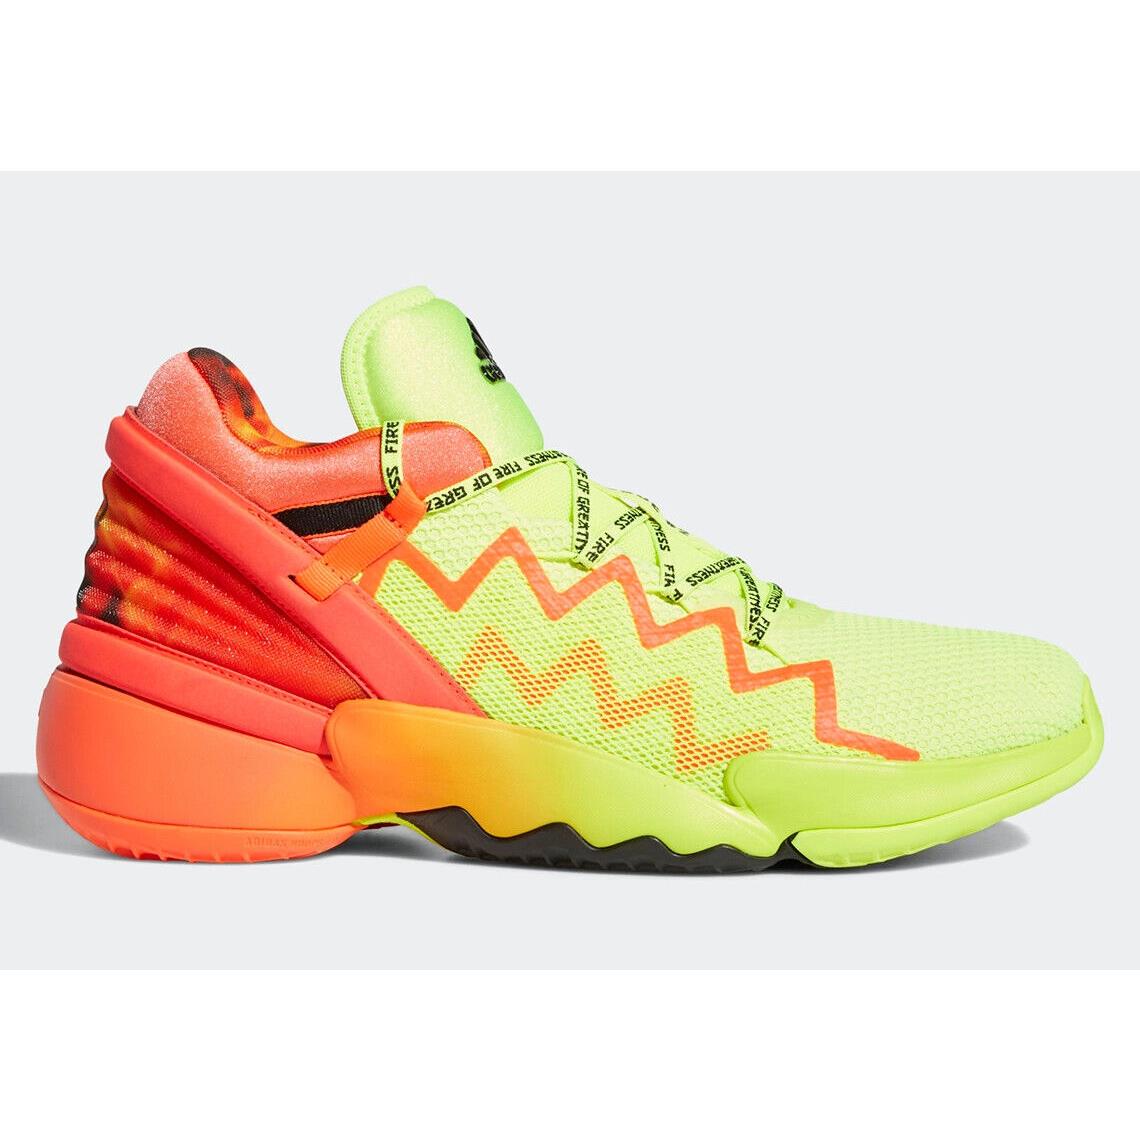 Adidas shoes  - Solar Yellow/Solar Red/Core Black 5